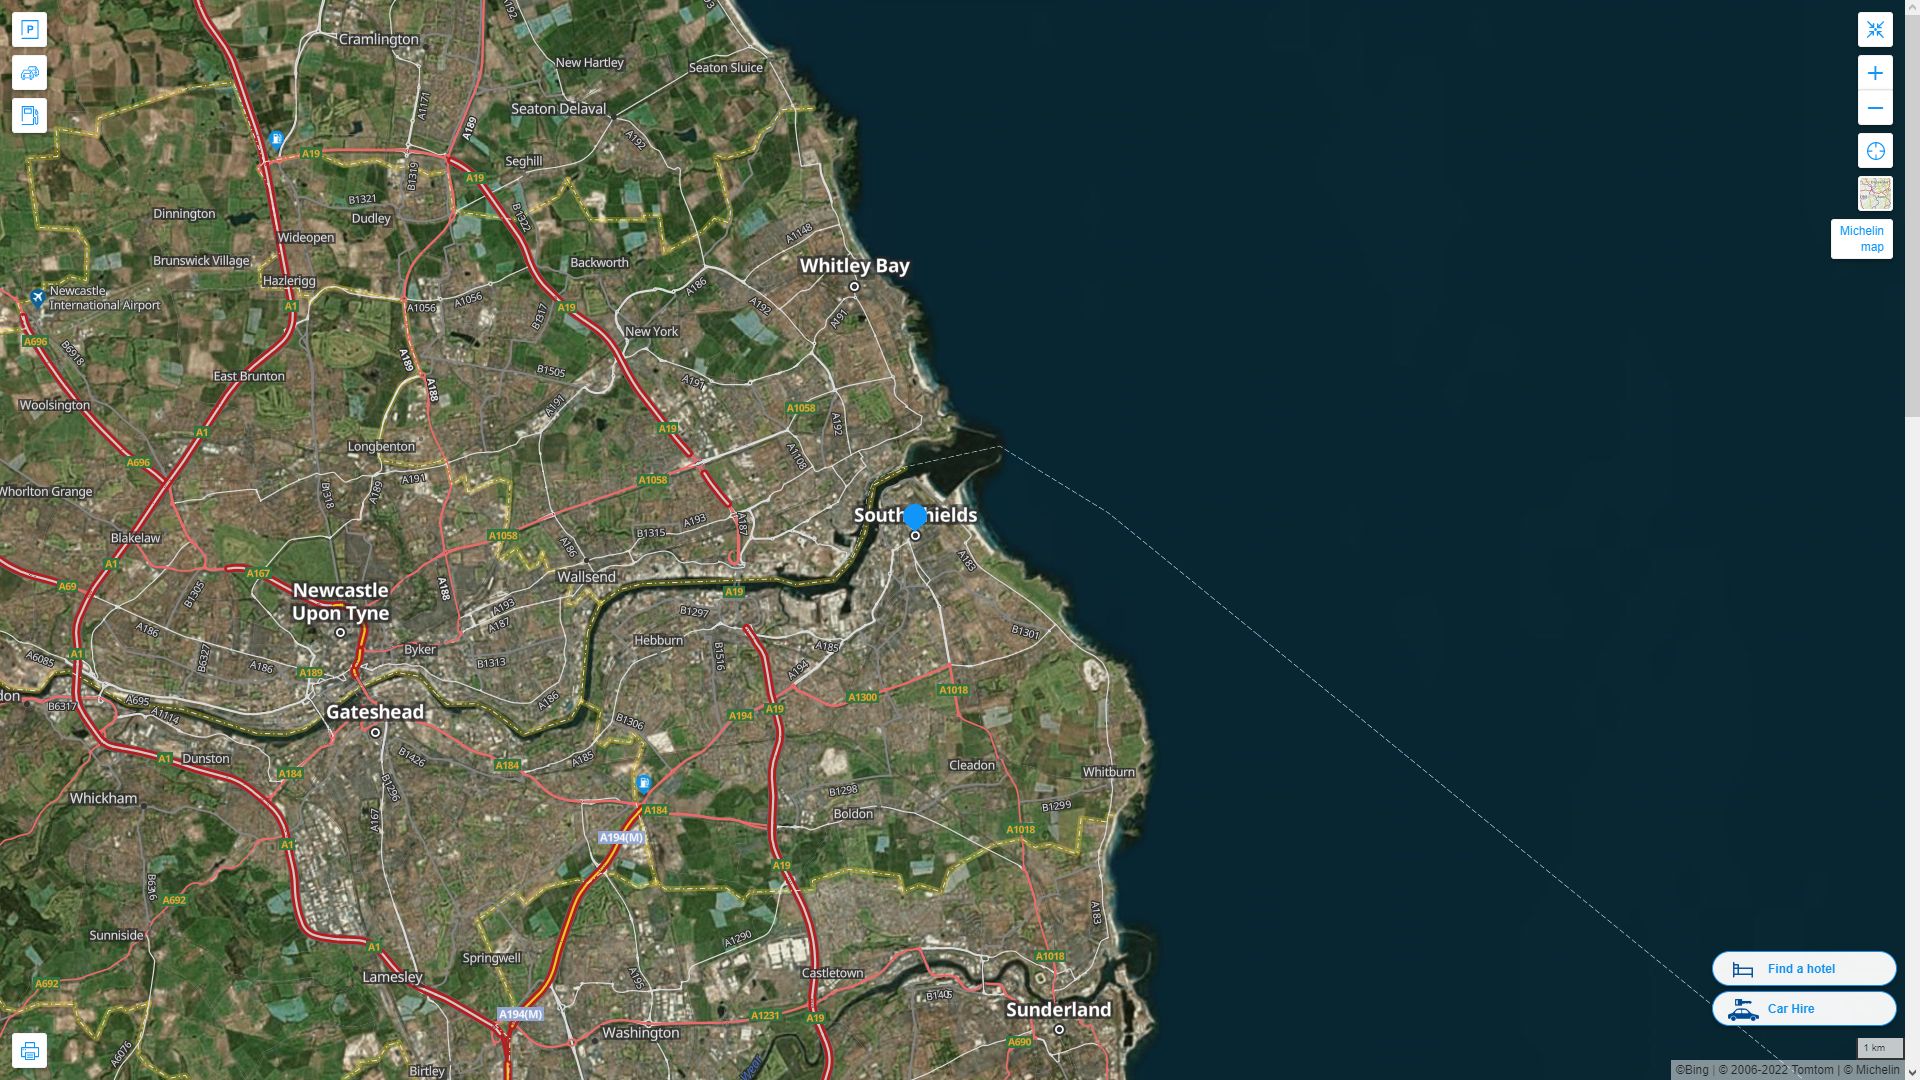 South Shields Highway and Road Map with Satellite View